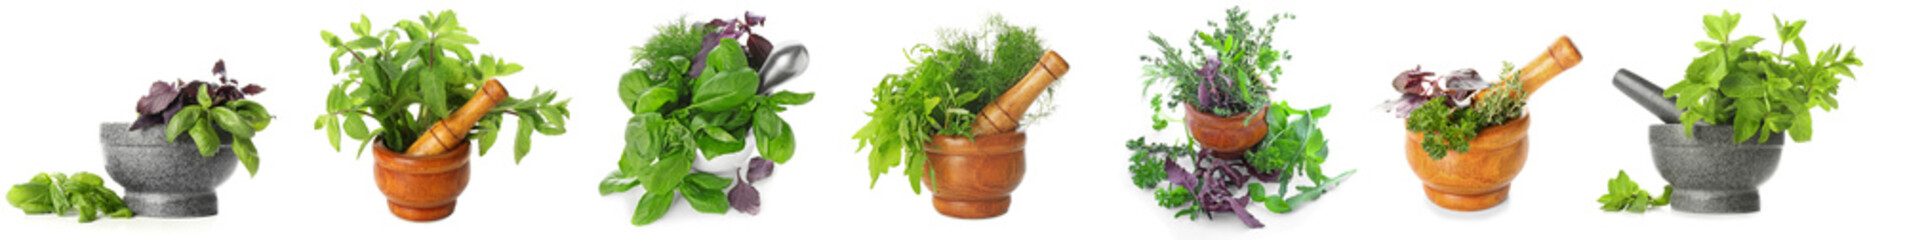 Collage of aromatic herbs on white background